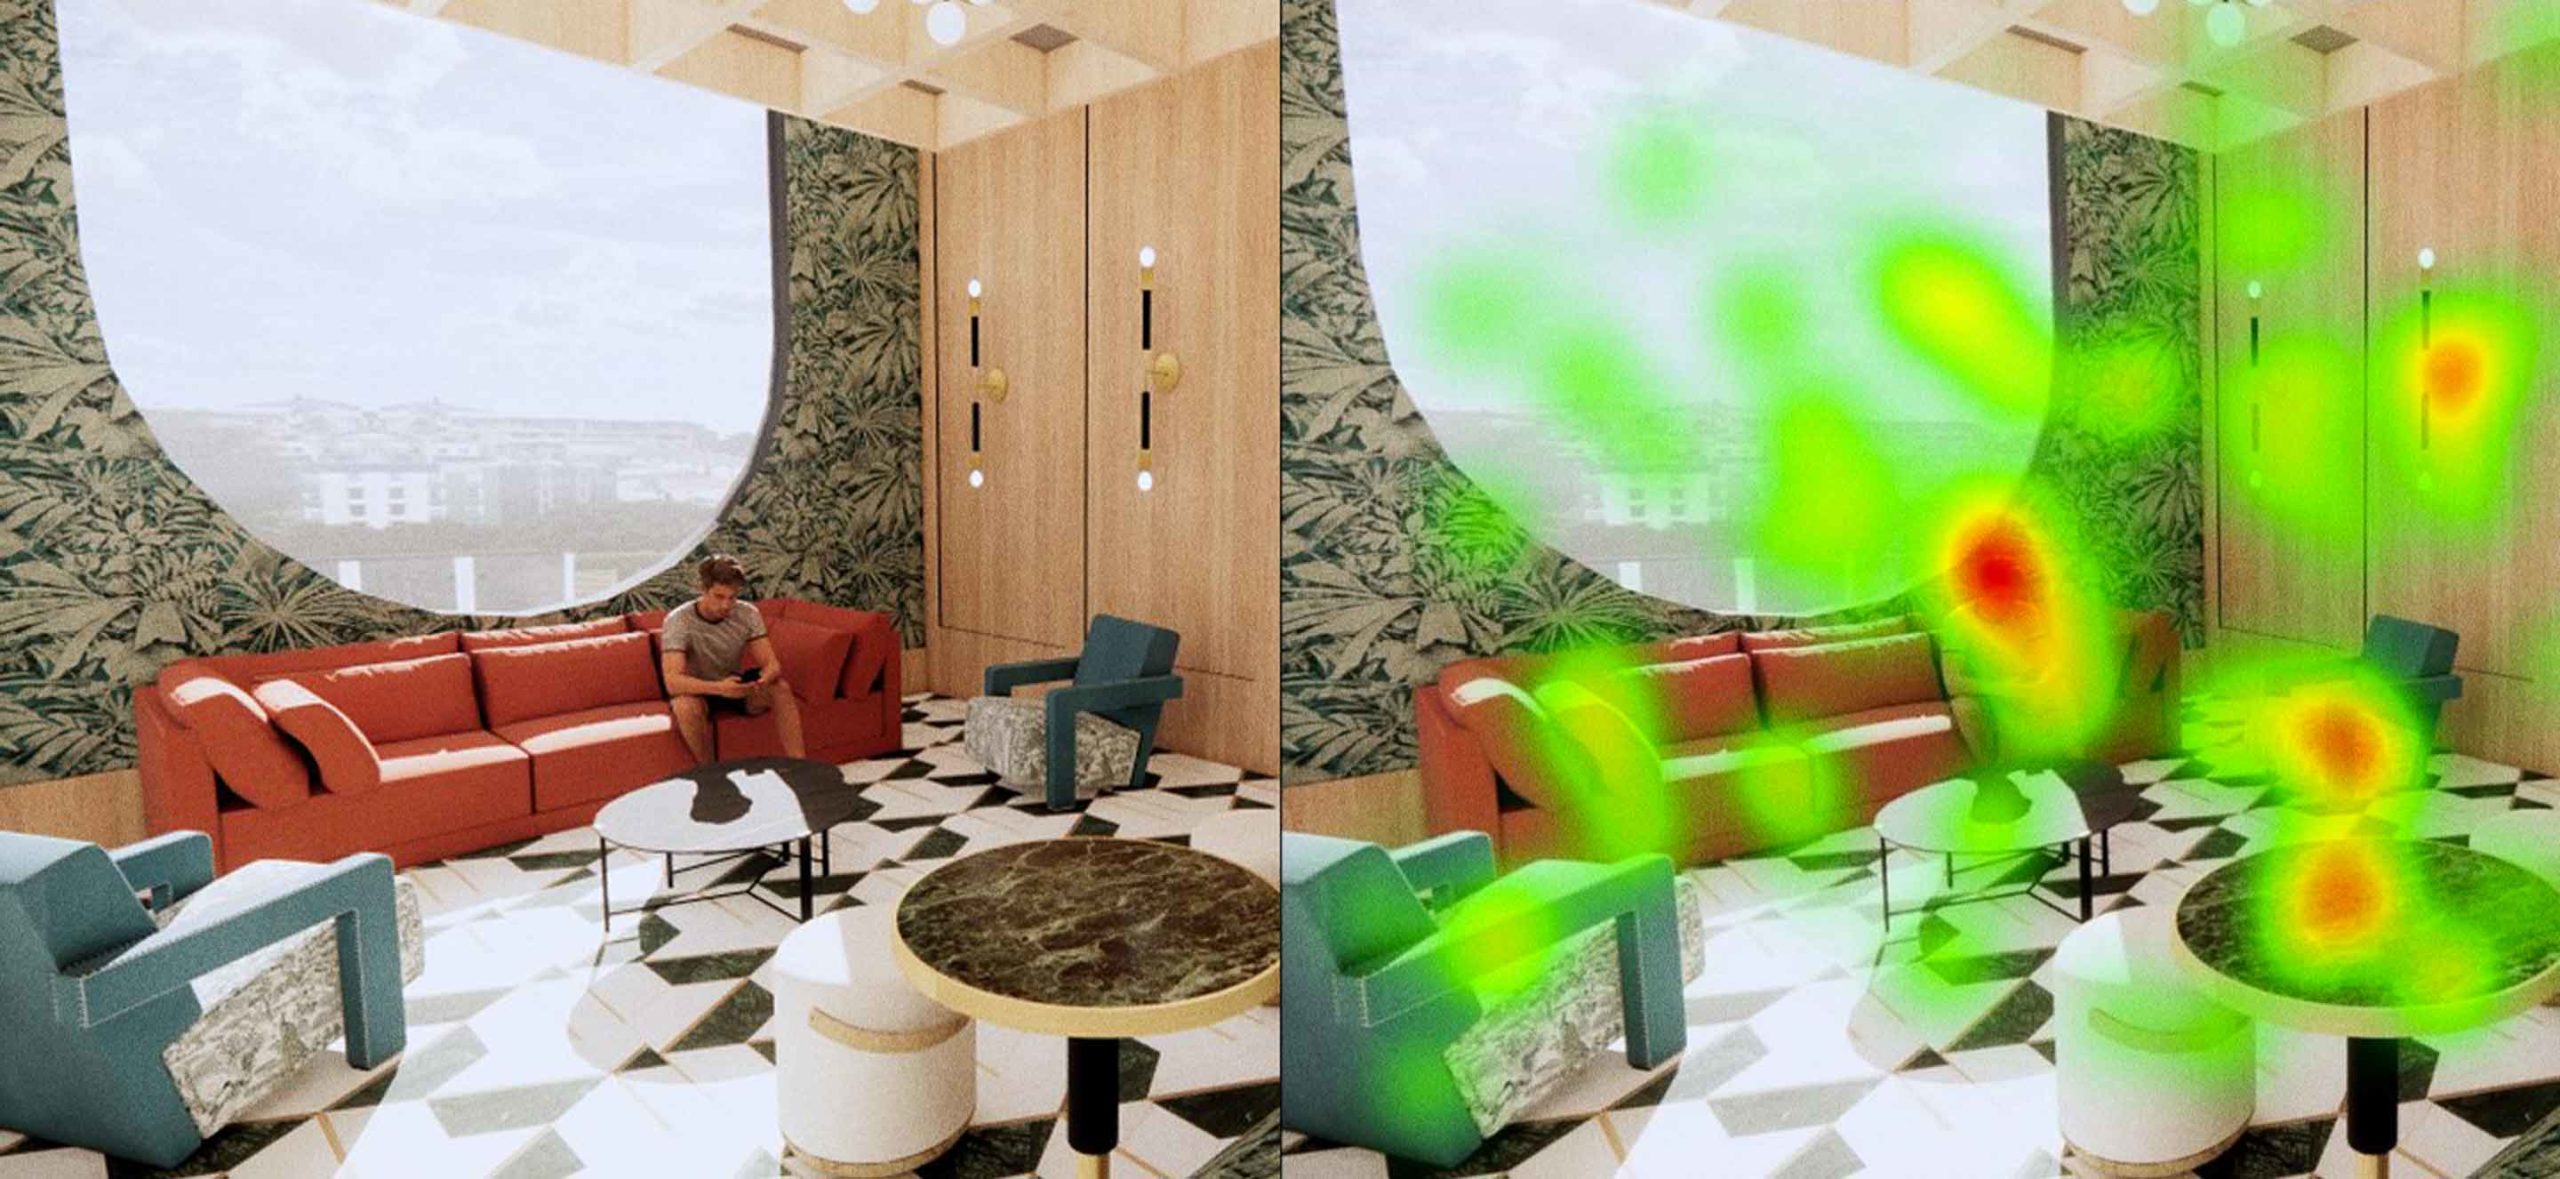 Two photos collages showing a side by side computerized 3D model of a living room with a large window. The photo on the right has green and red circles to indicate where our eyes look first.